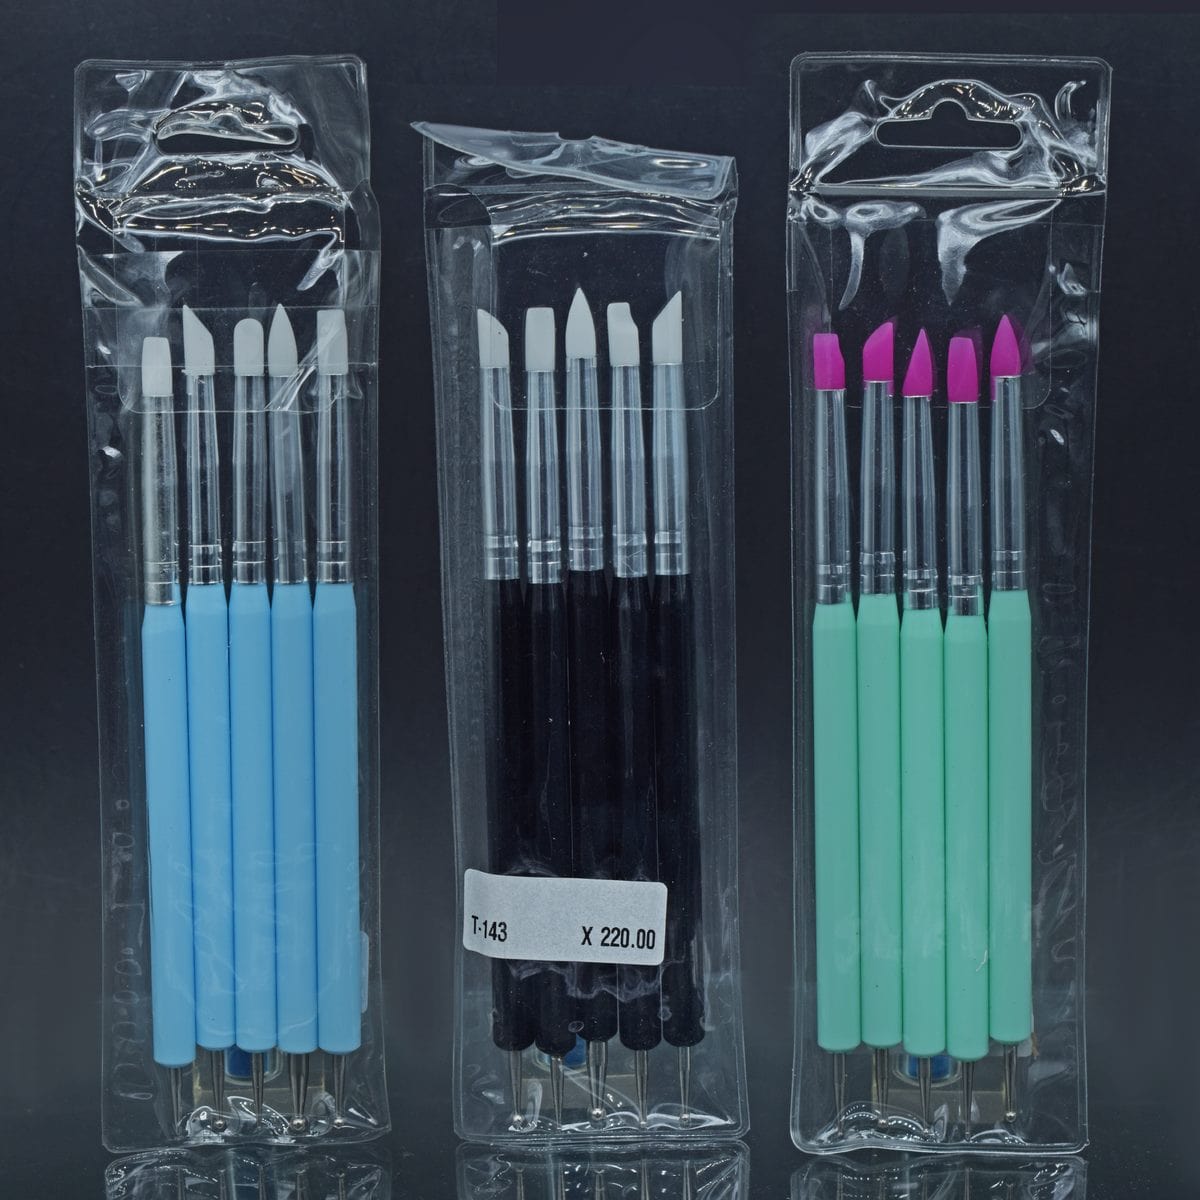 jags-mumbai Mould 5-Piece Set with Plastic Handles and Silicone Tips